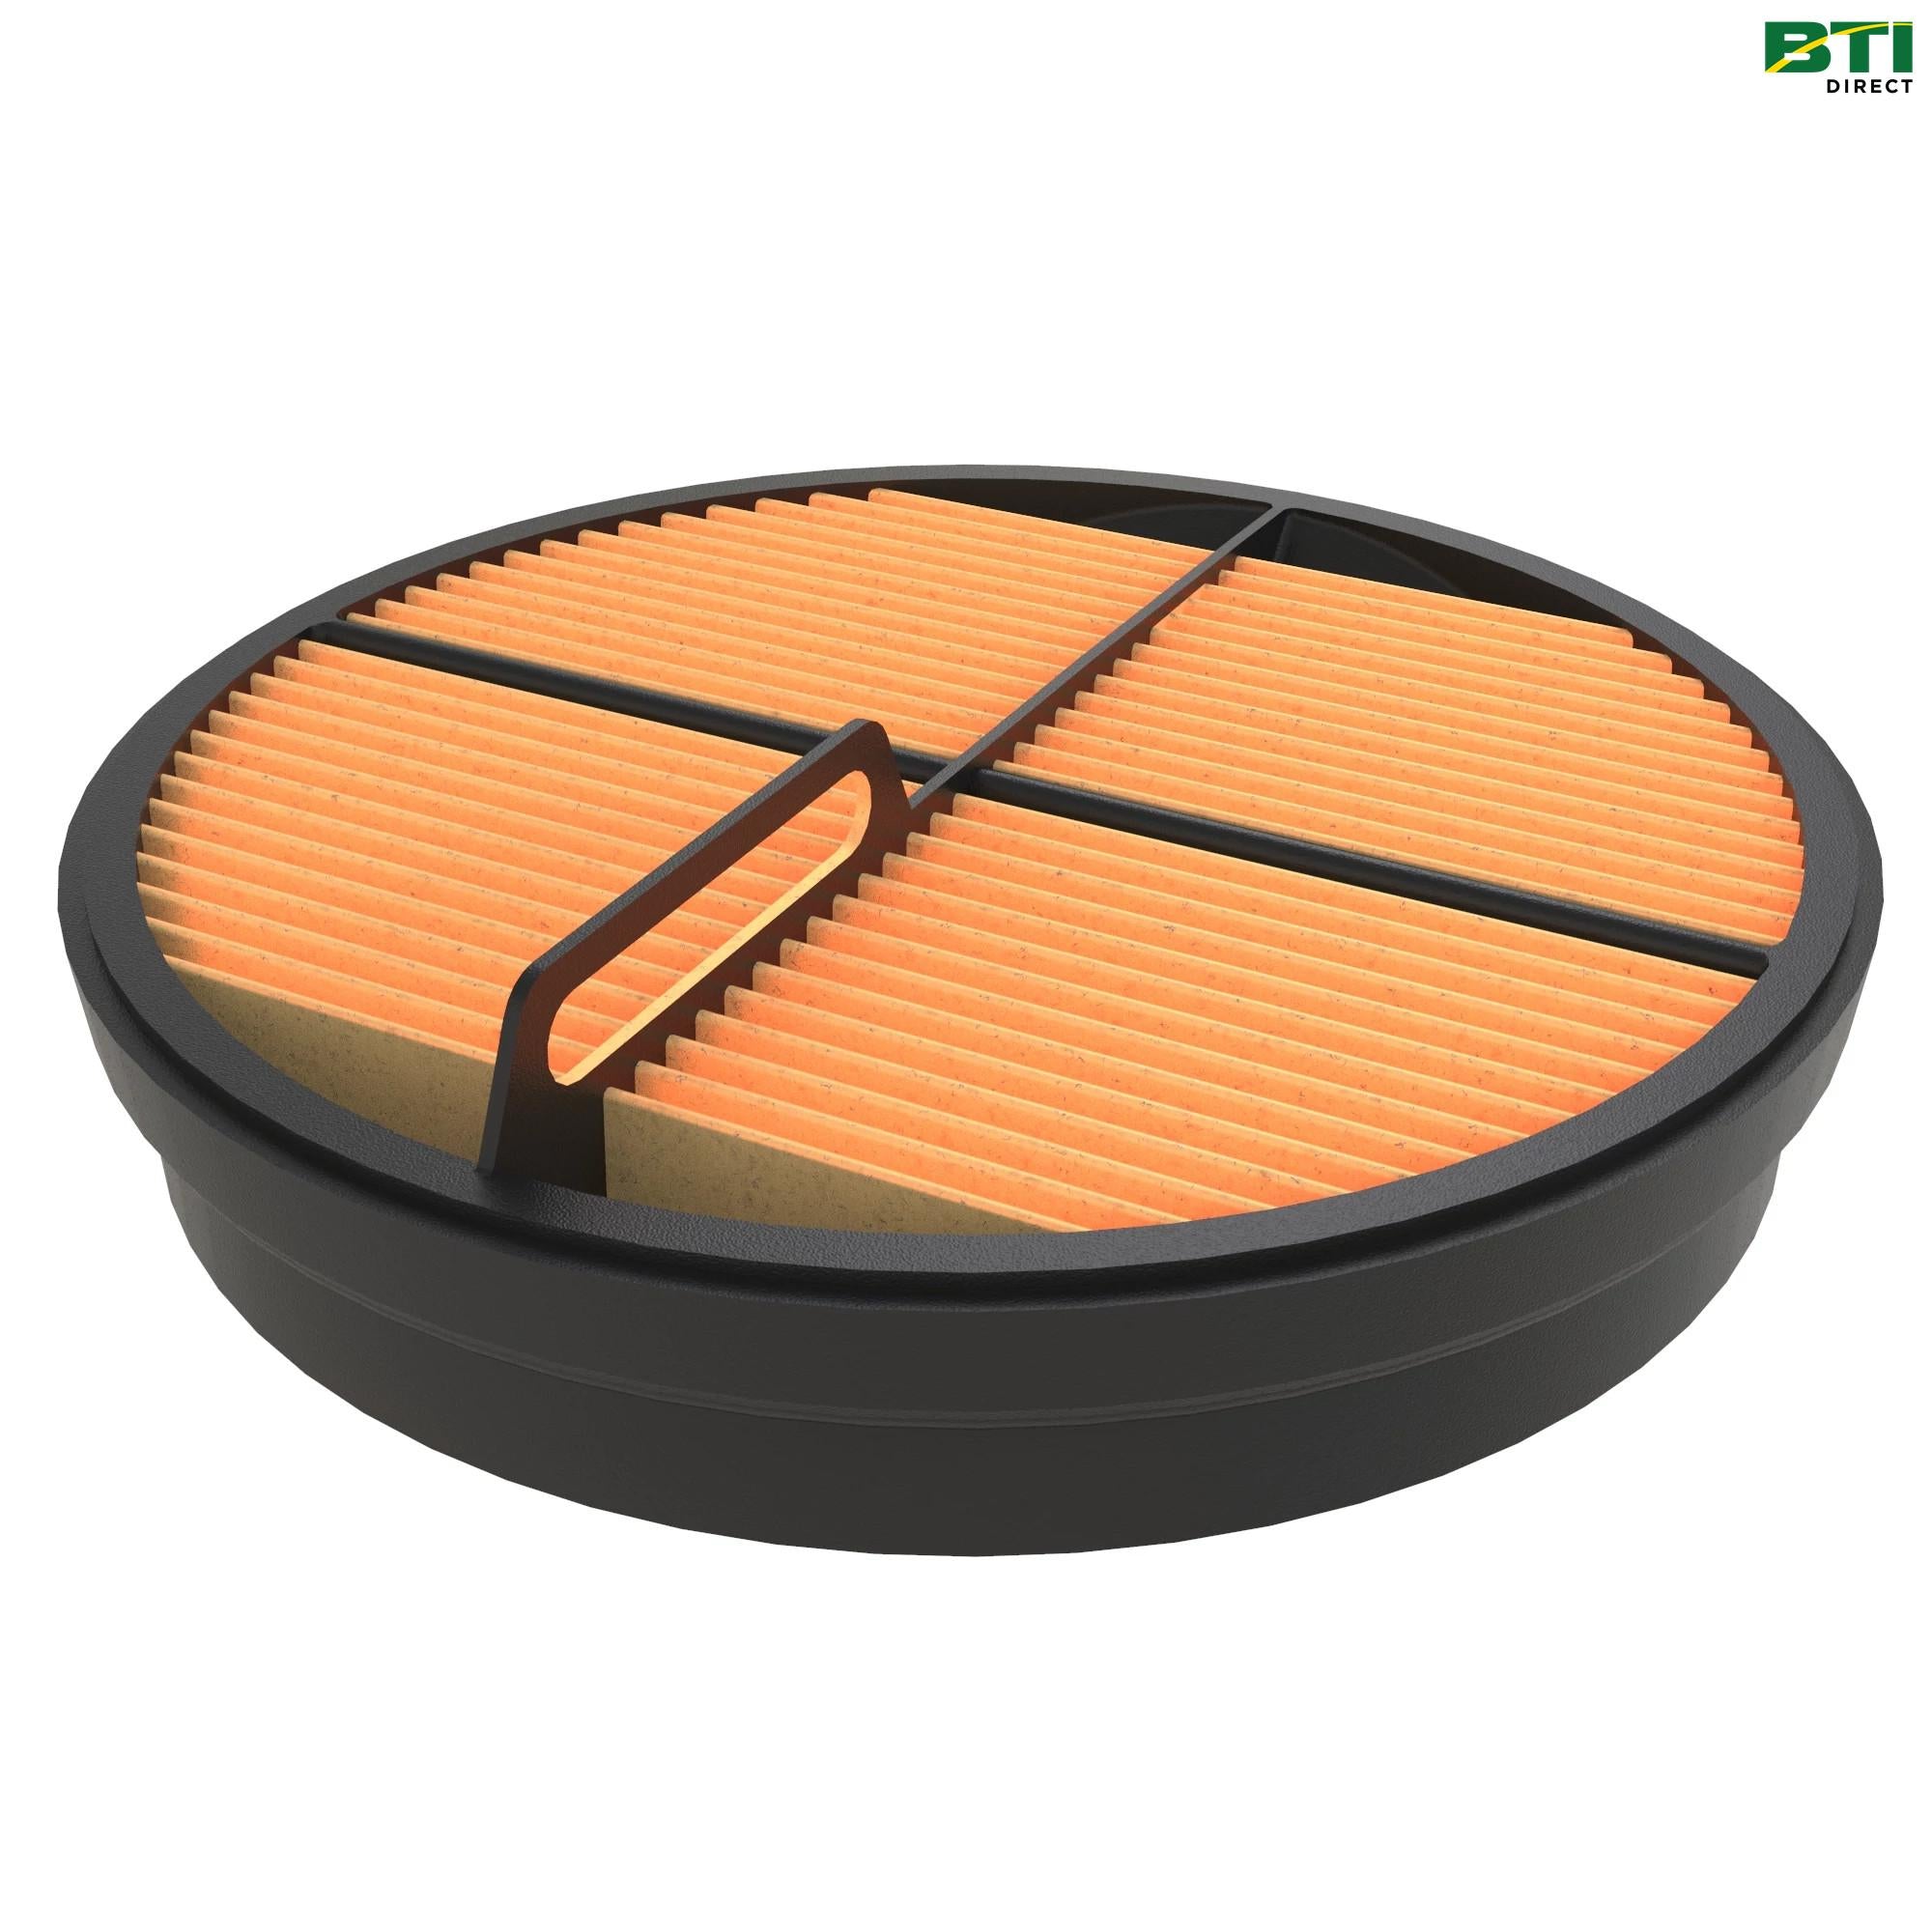 RE181915: Secondary Air Filter Element